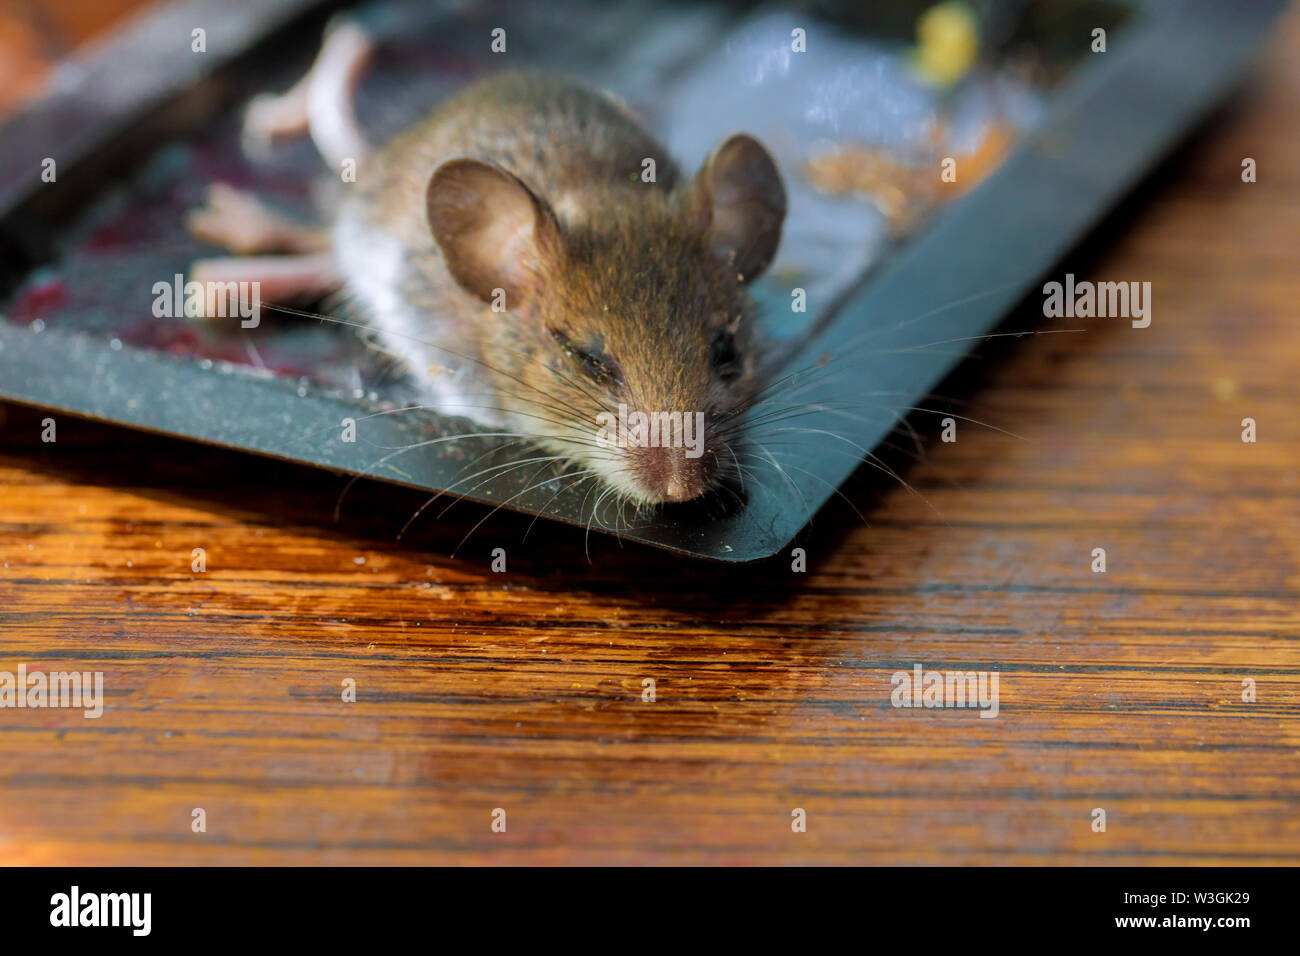 https://c8.alamy.com/comp/W3GK29/dead-rat-glued-at-clue-tray-on-wood-table-mouse-killed-W3GK29.jpg